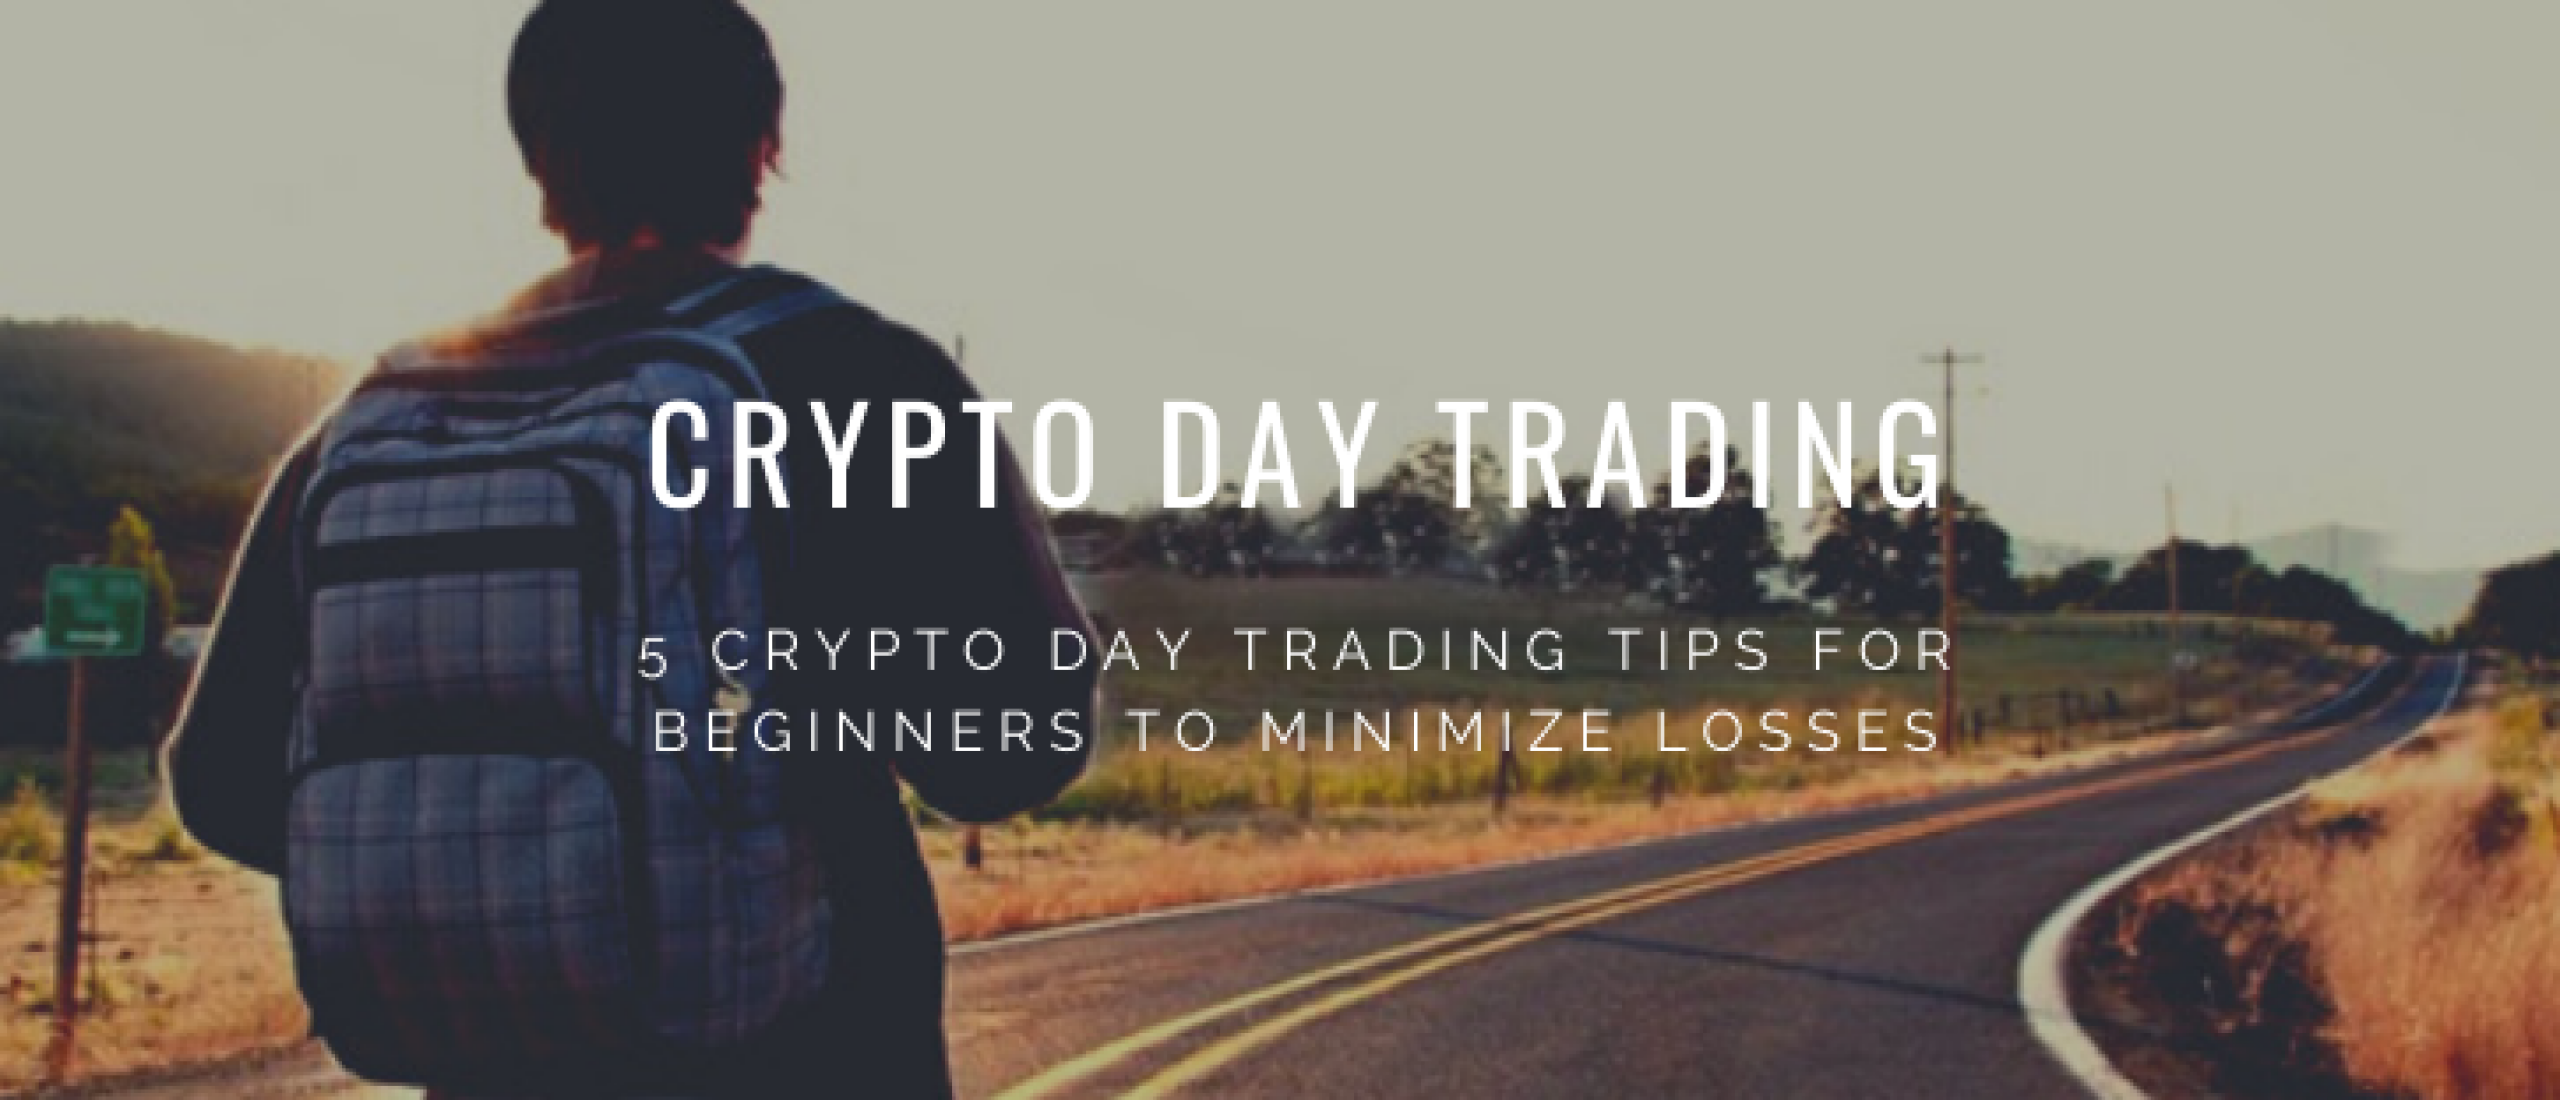 5x Crypto Day Trading Tips for Beginners